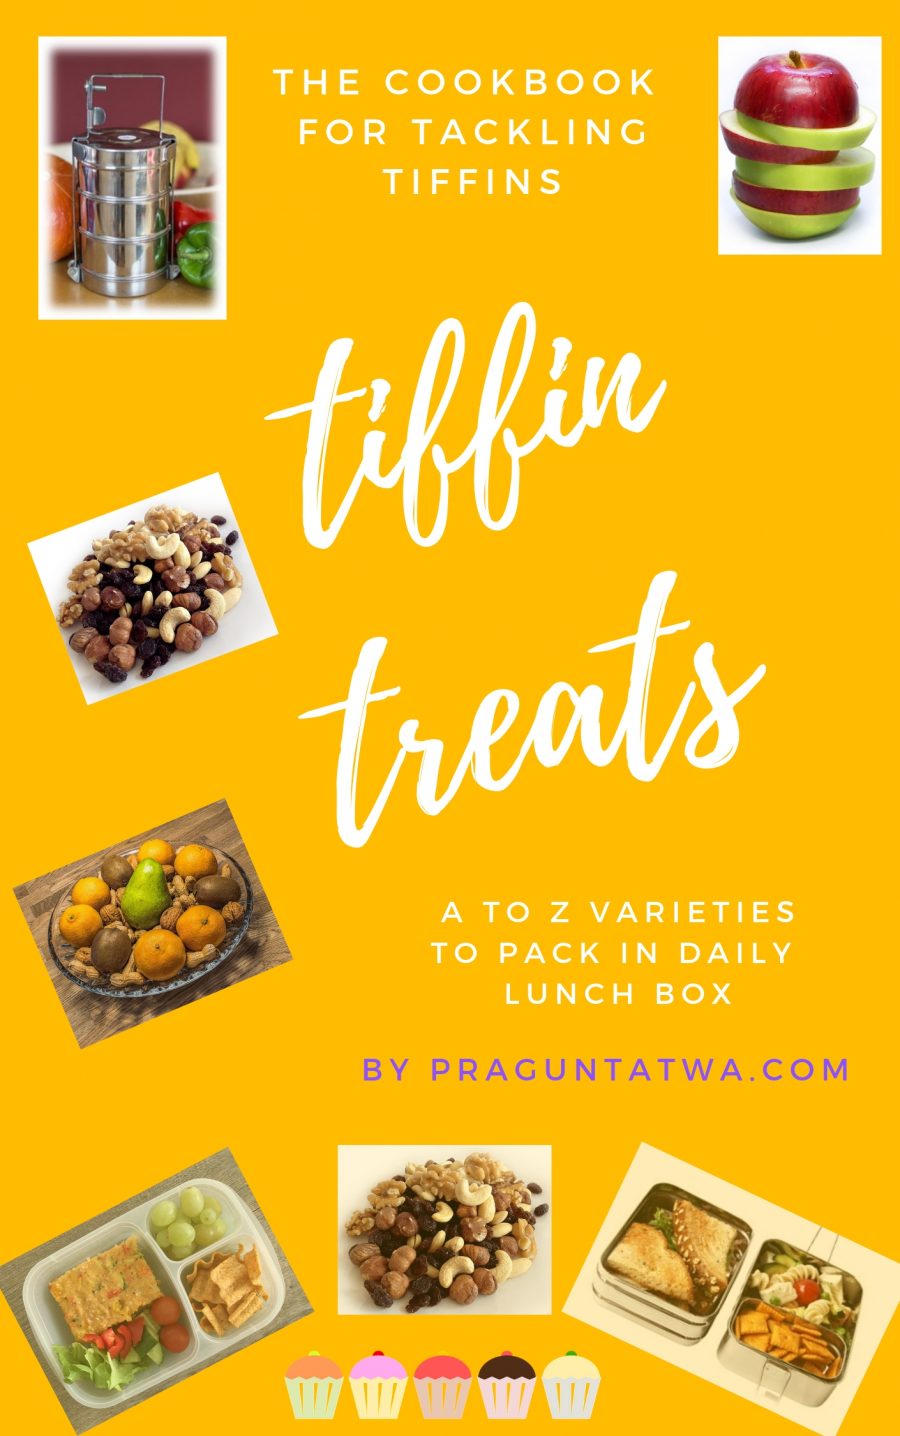 Book Review – Tiffin treats